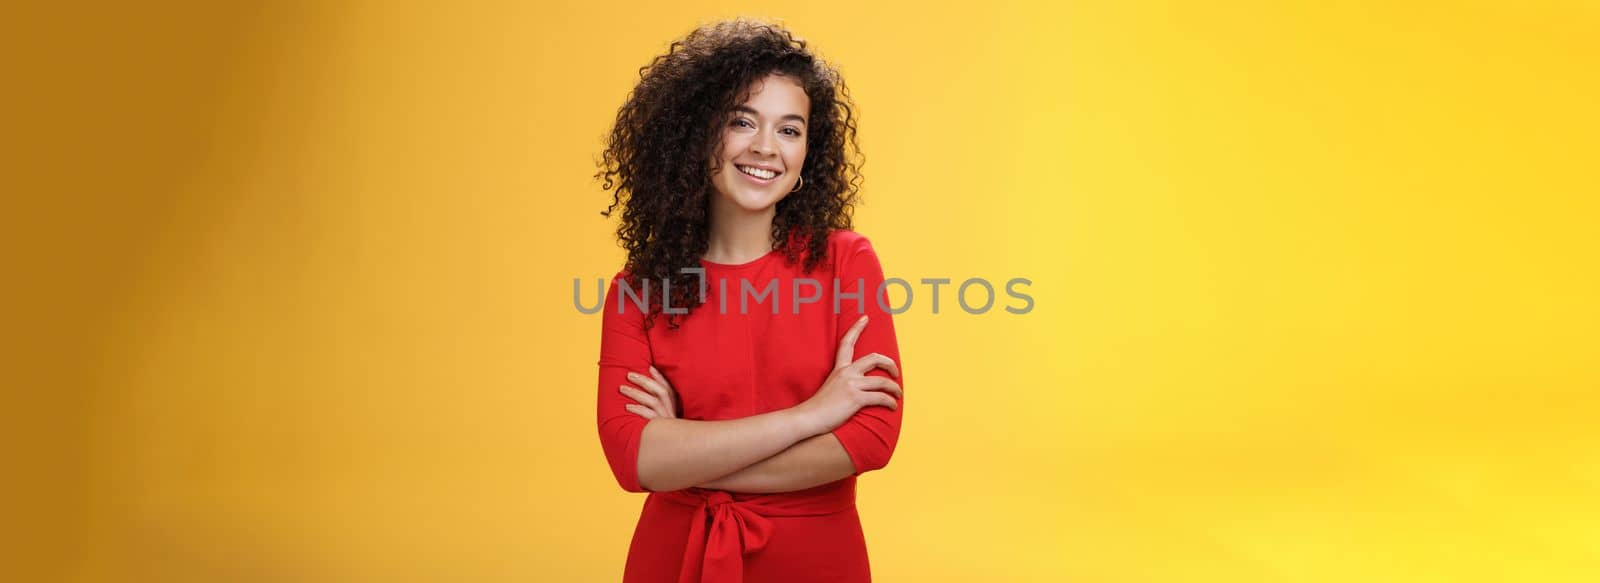 Confident charismatic young curly-haired woman in casual red dress holding hands crossed over chest in self-assured satisfied expression, smiling delighted posing over yellow background.